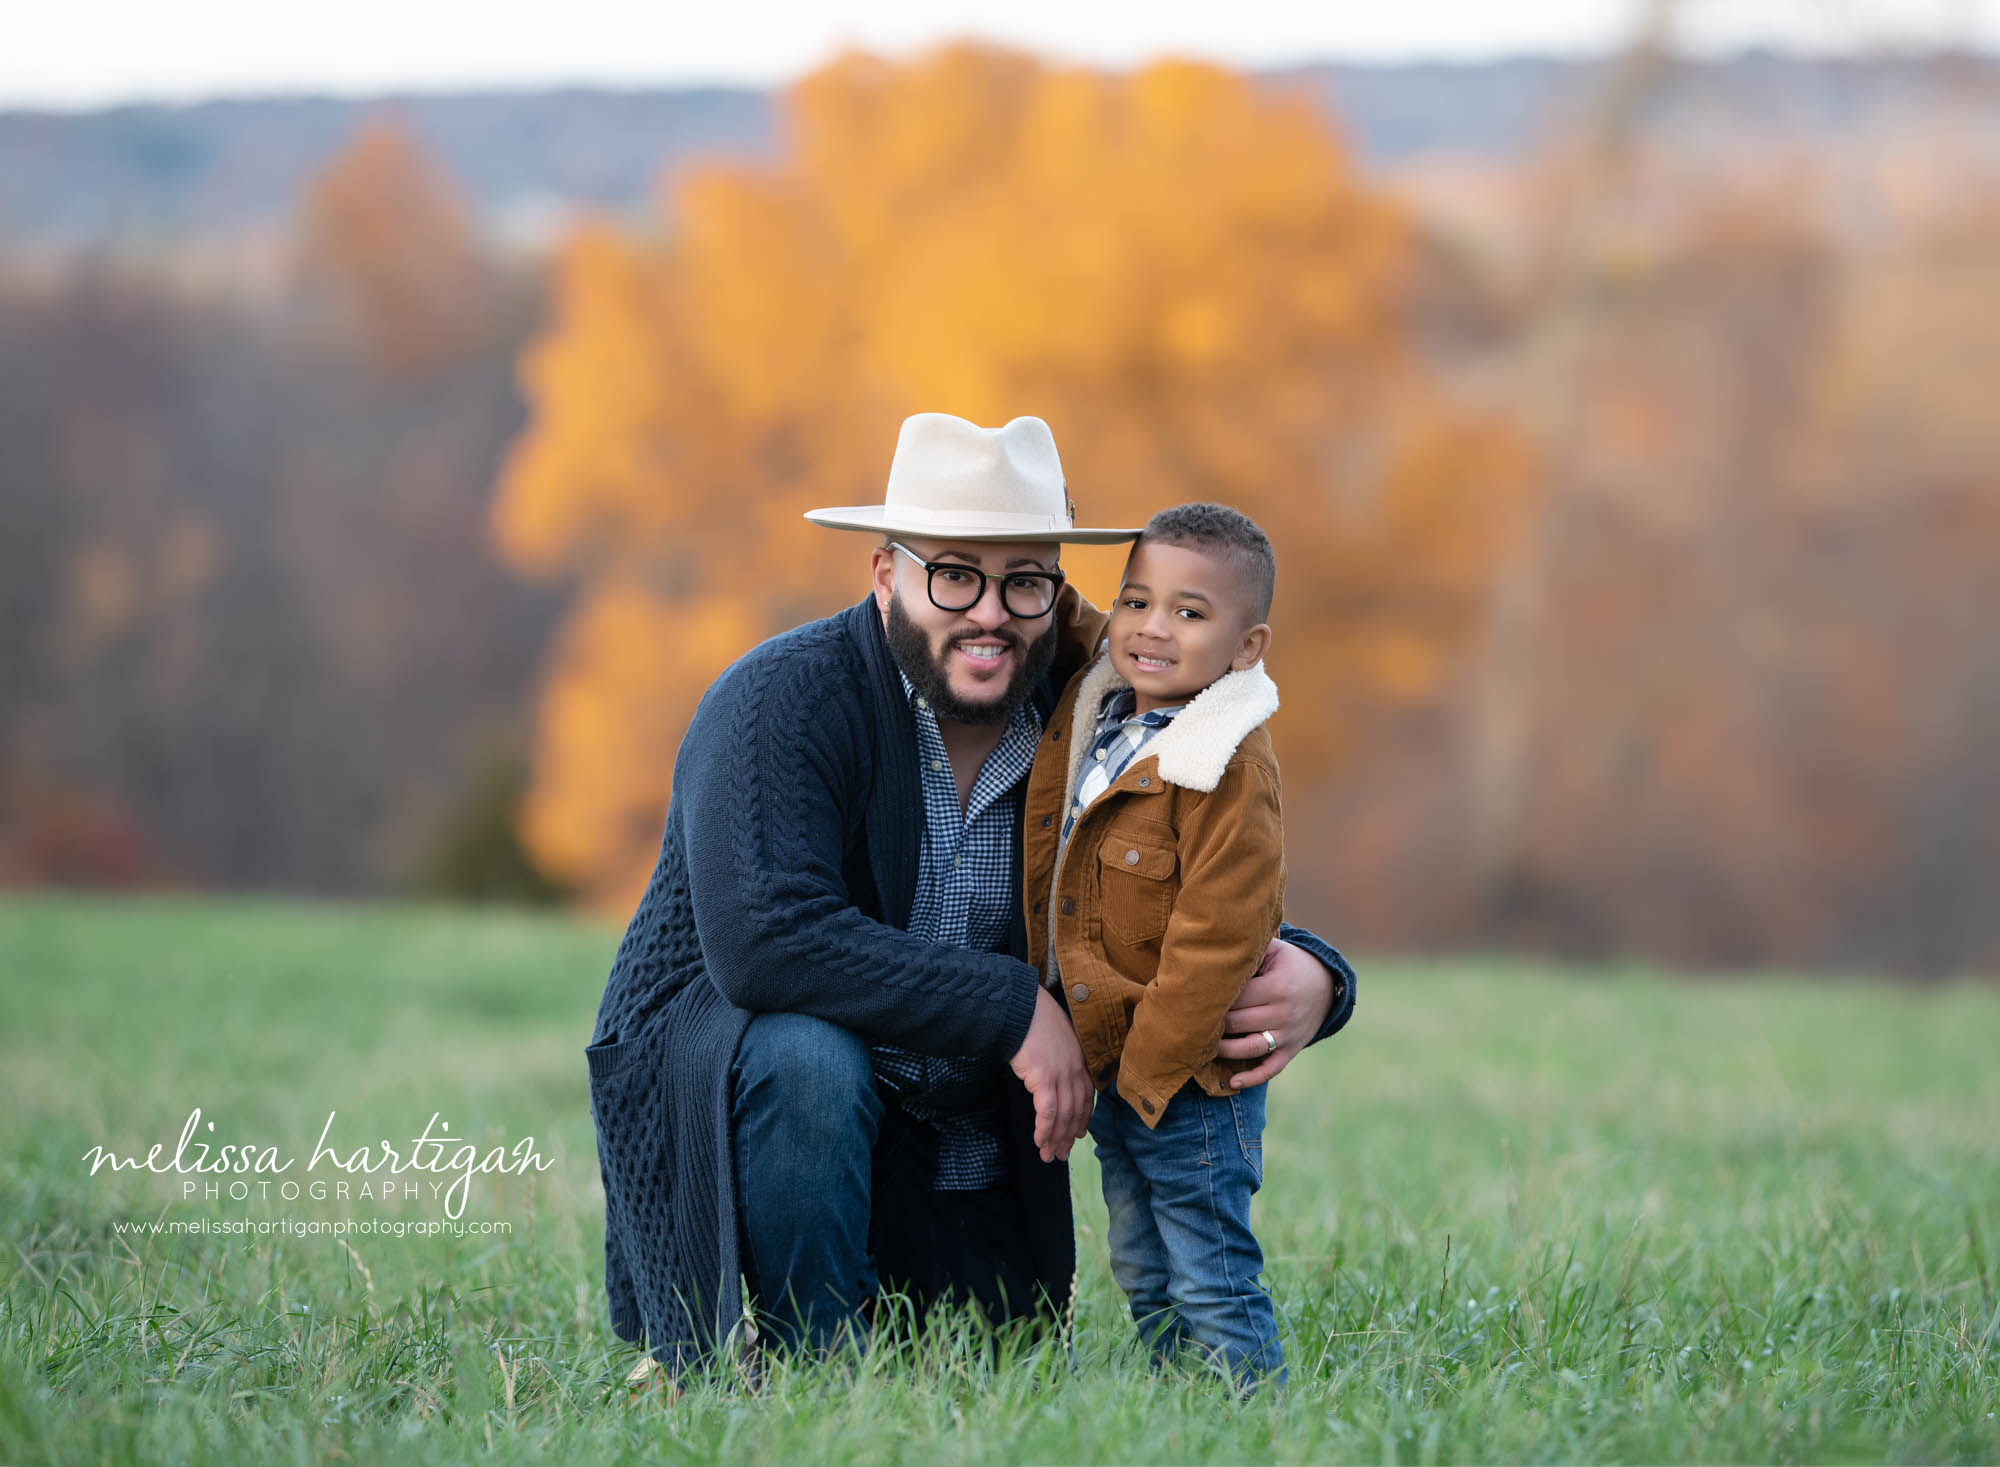 dad kneeling down with older son family photography session captured outside CT family photographer